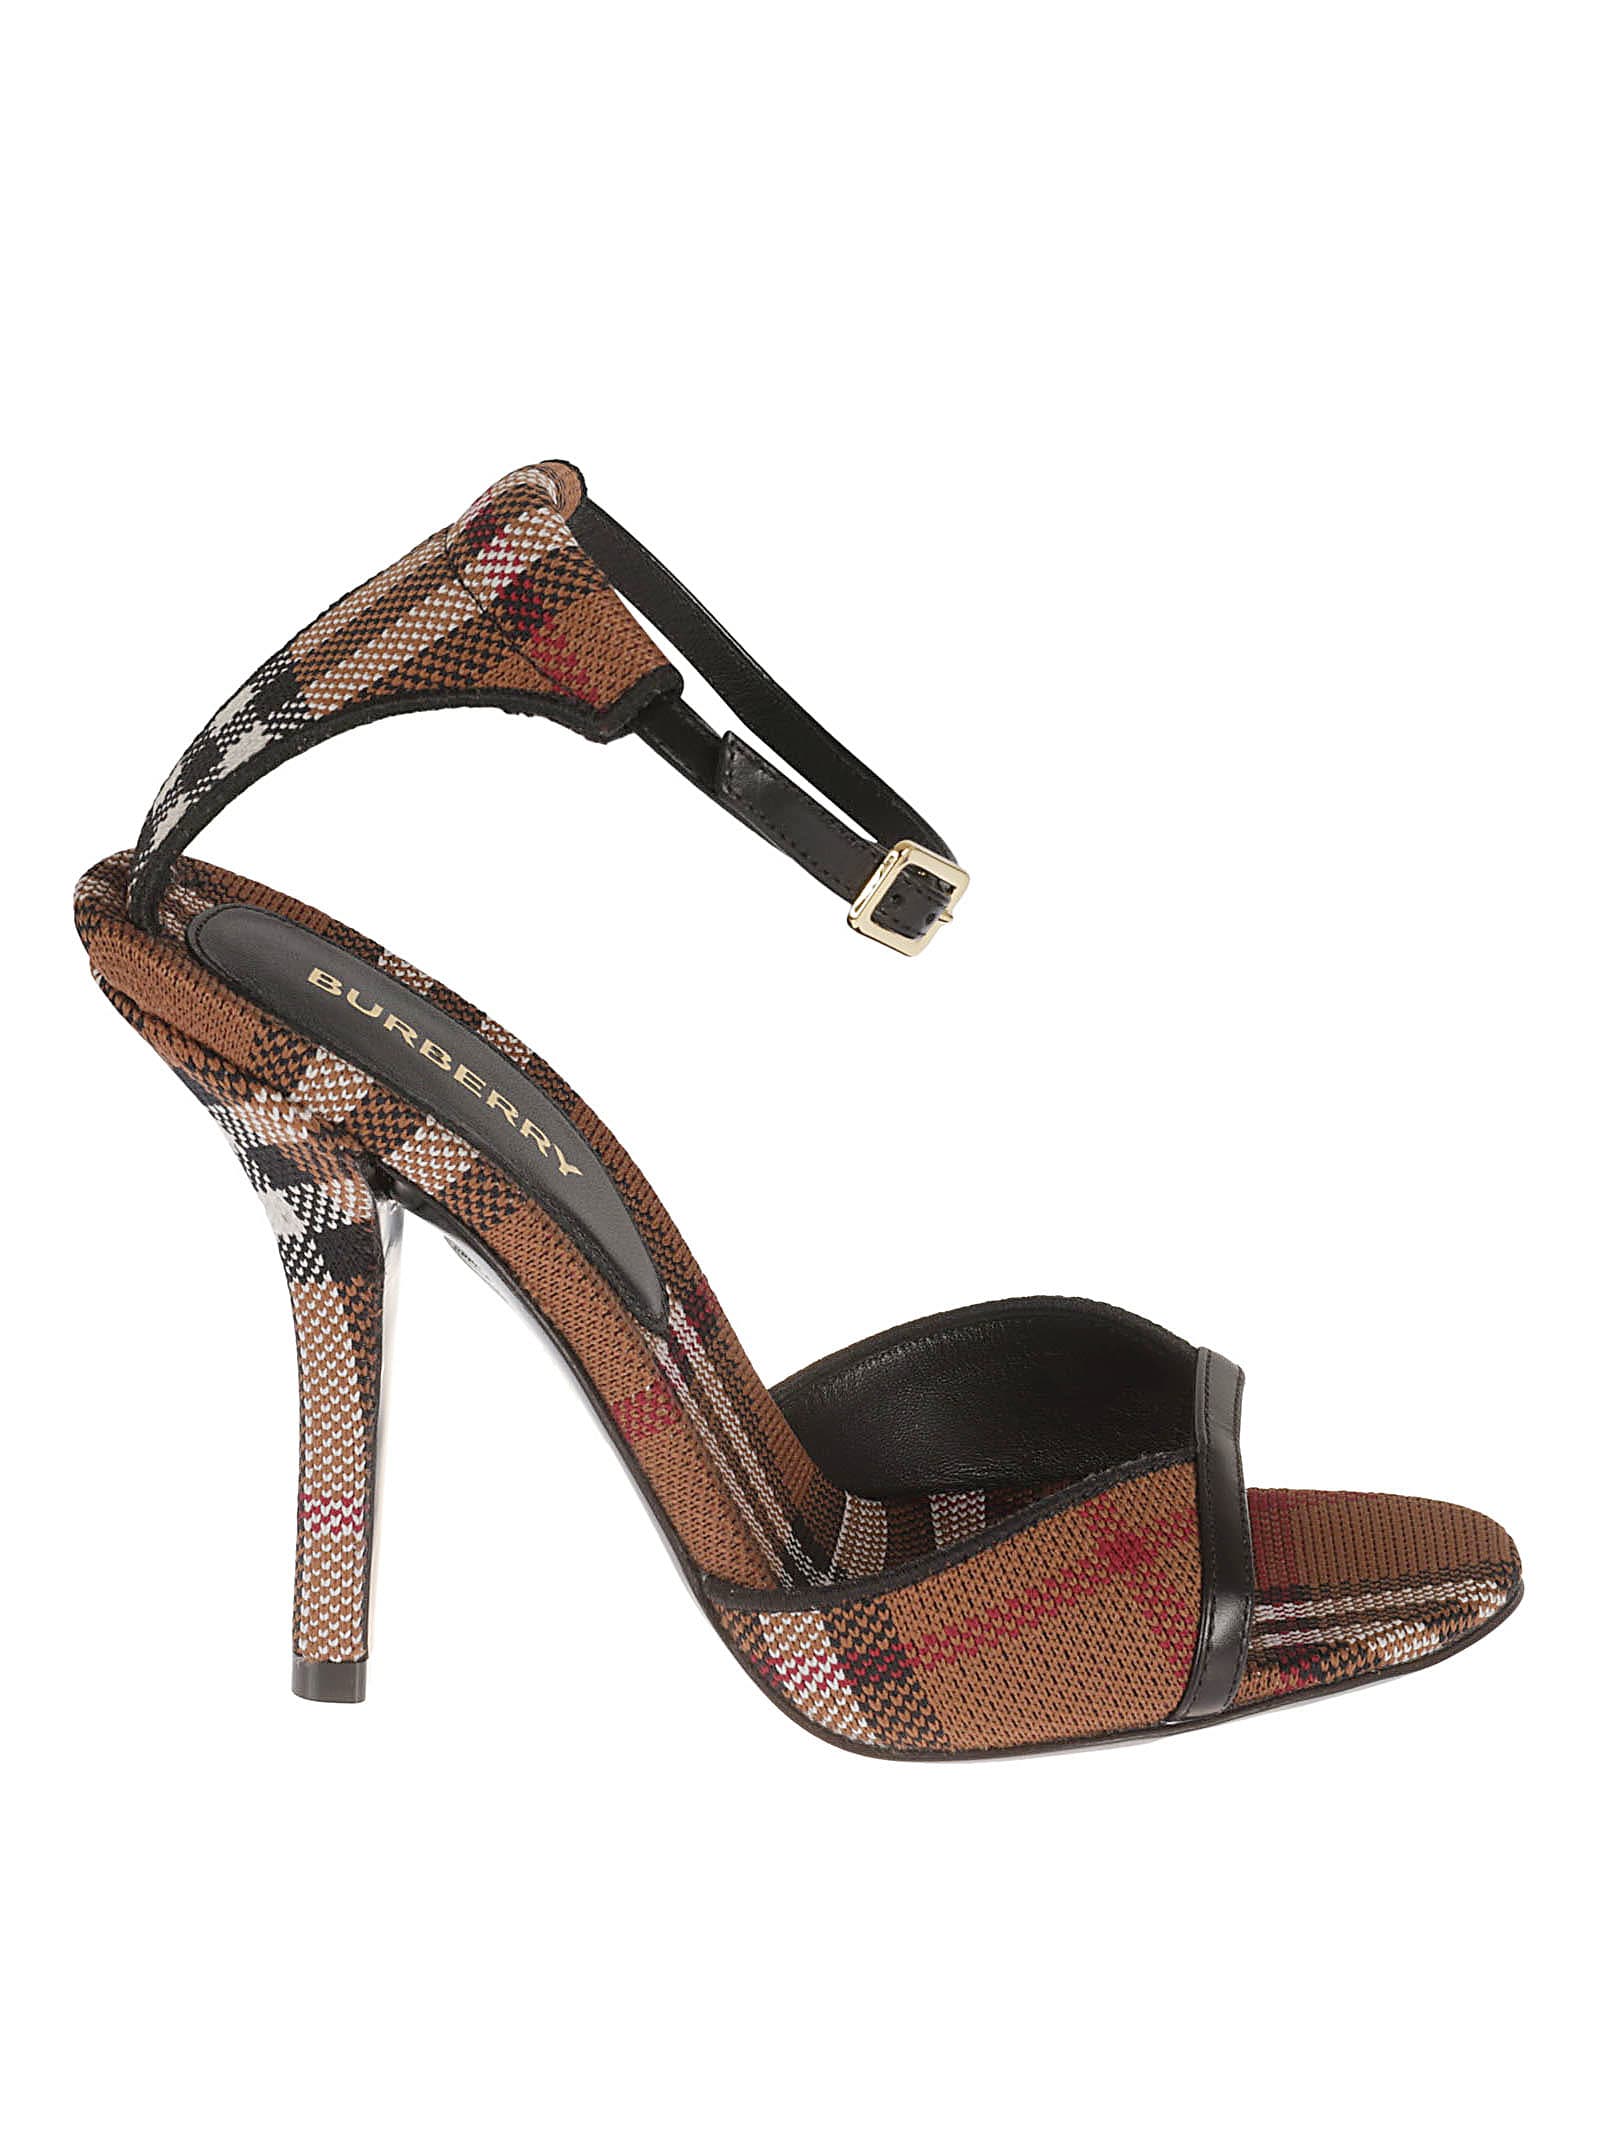 BURBERRY WENDY SANDALS